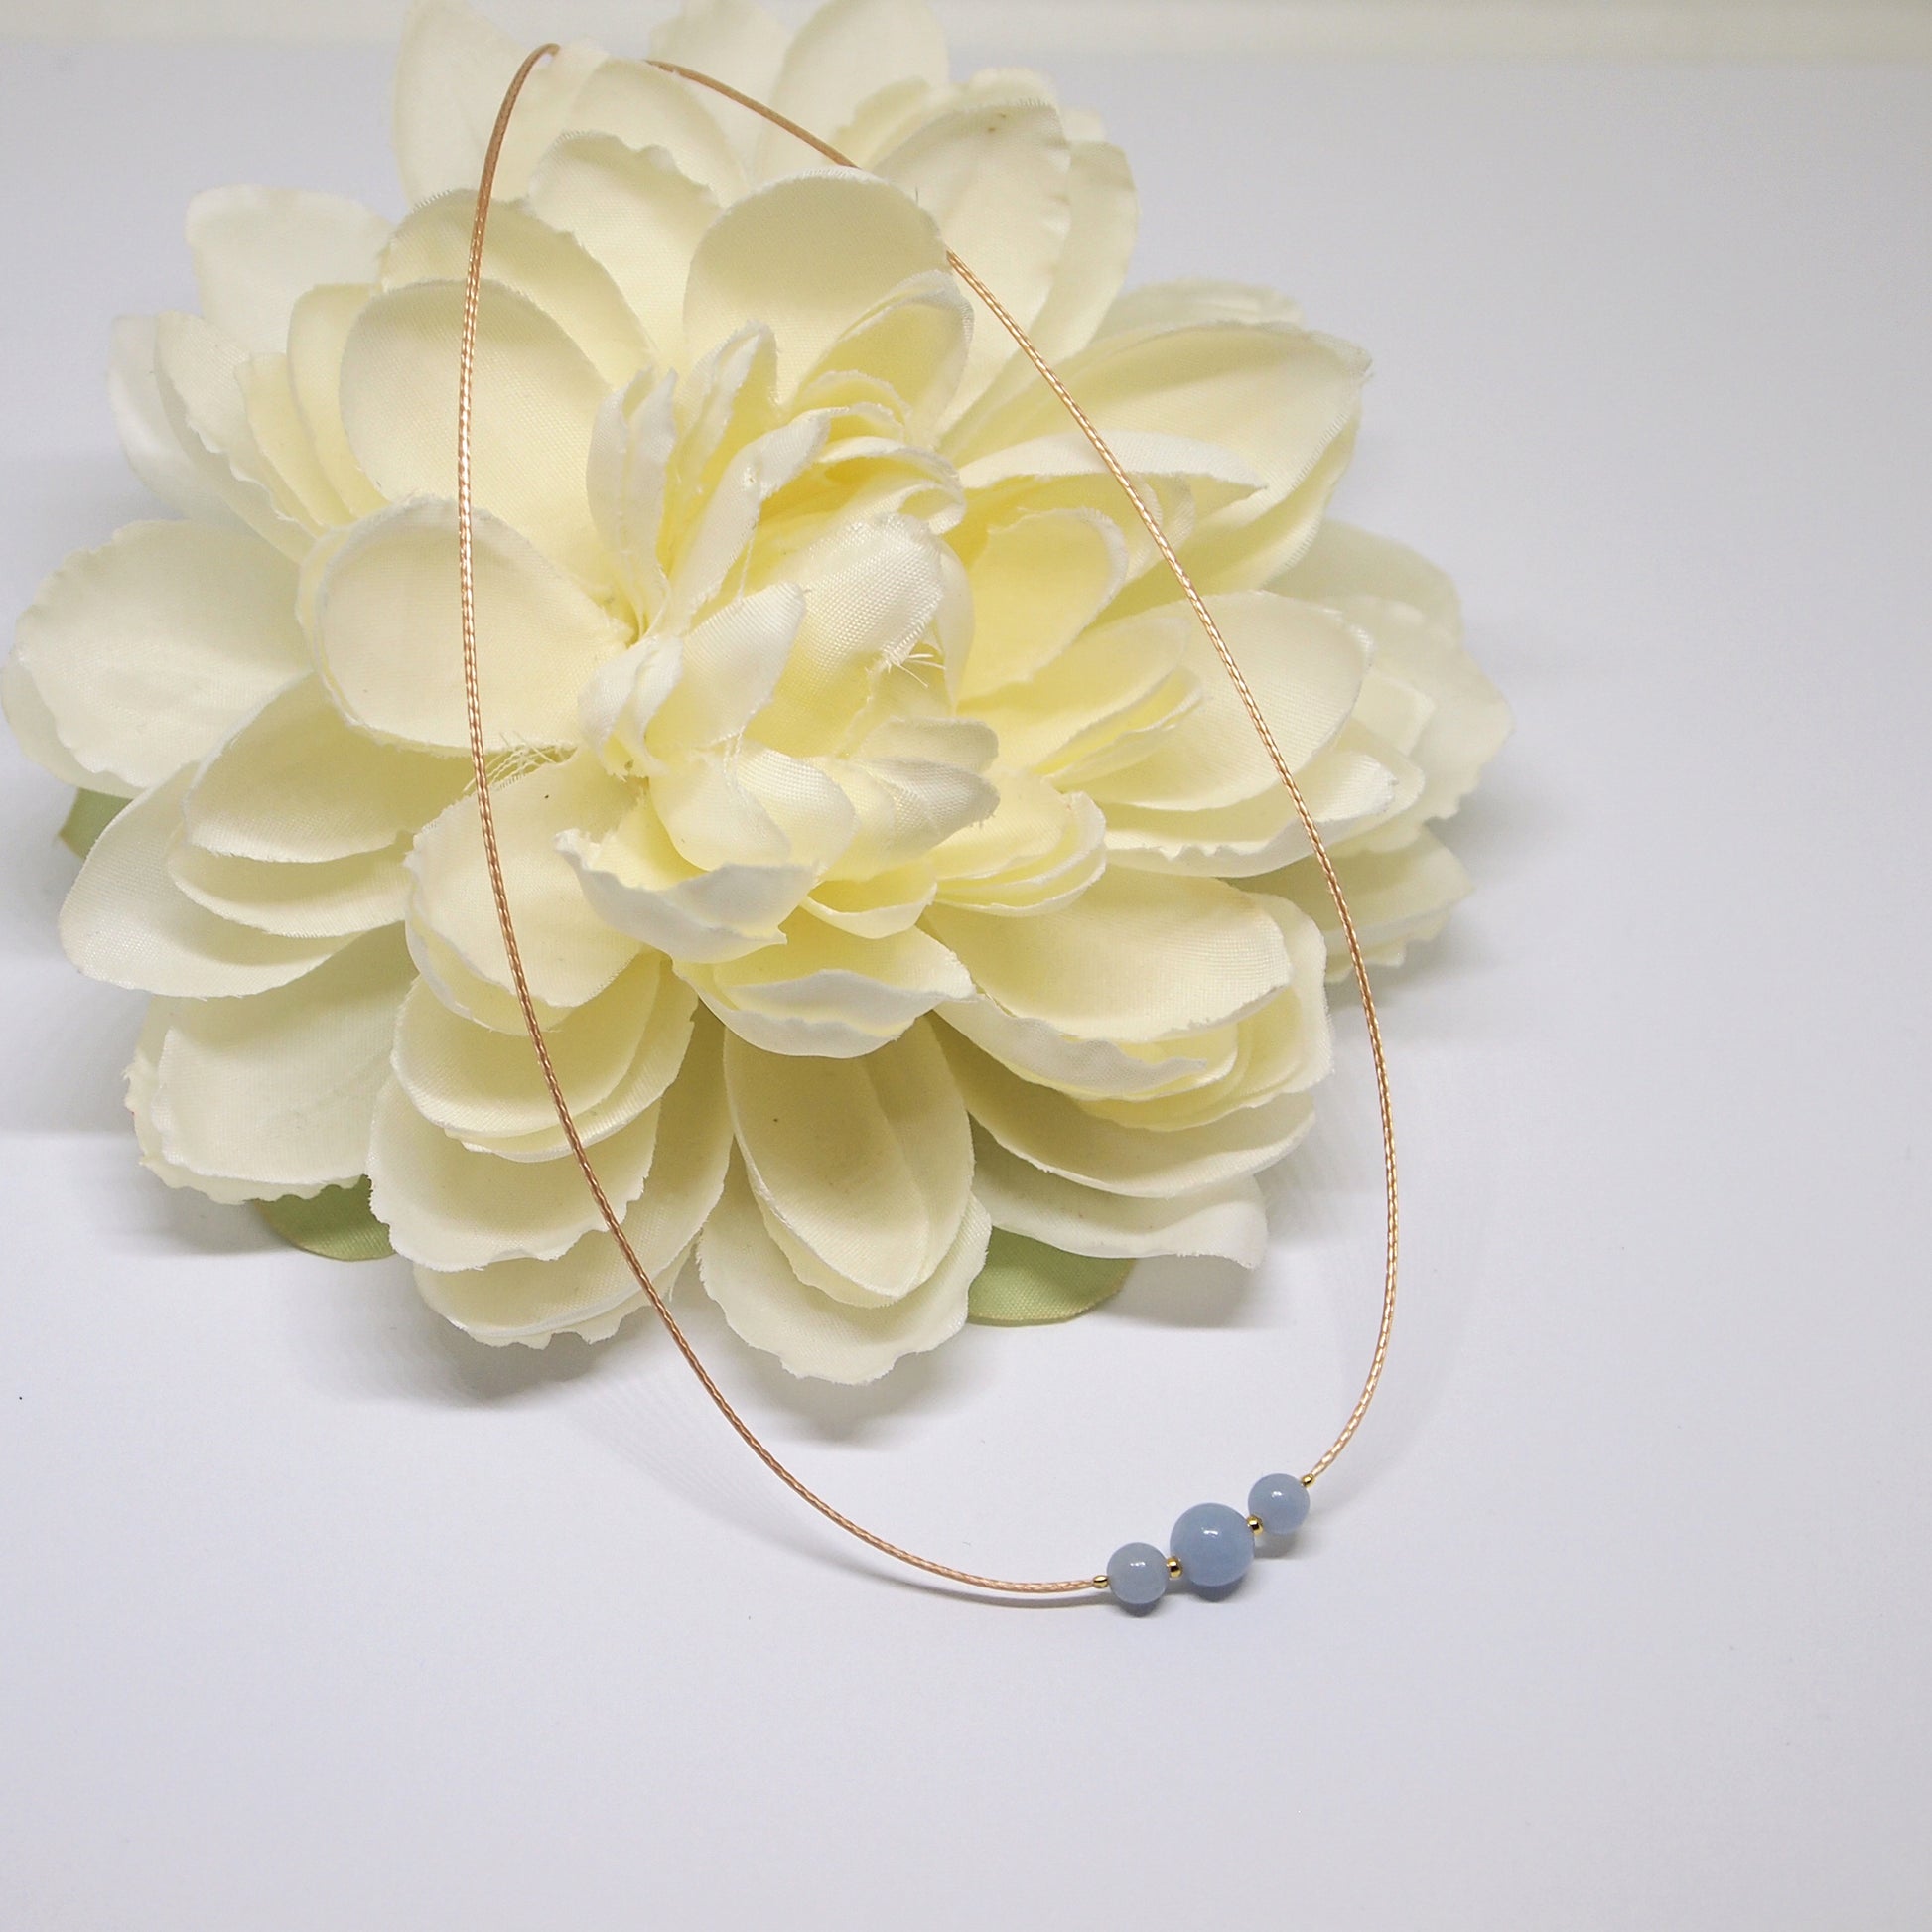 very subtle necklace with angelite, gemstone cord choker